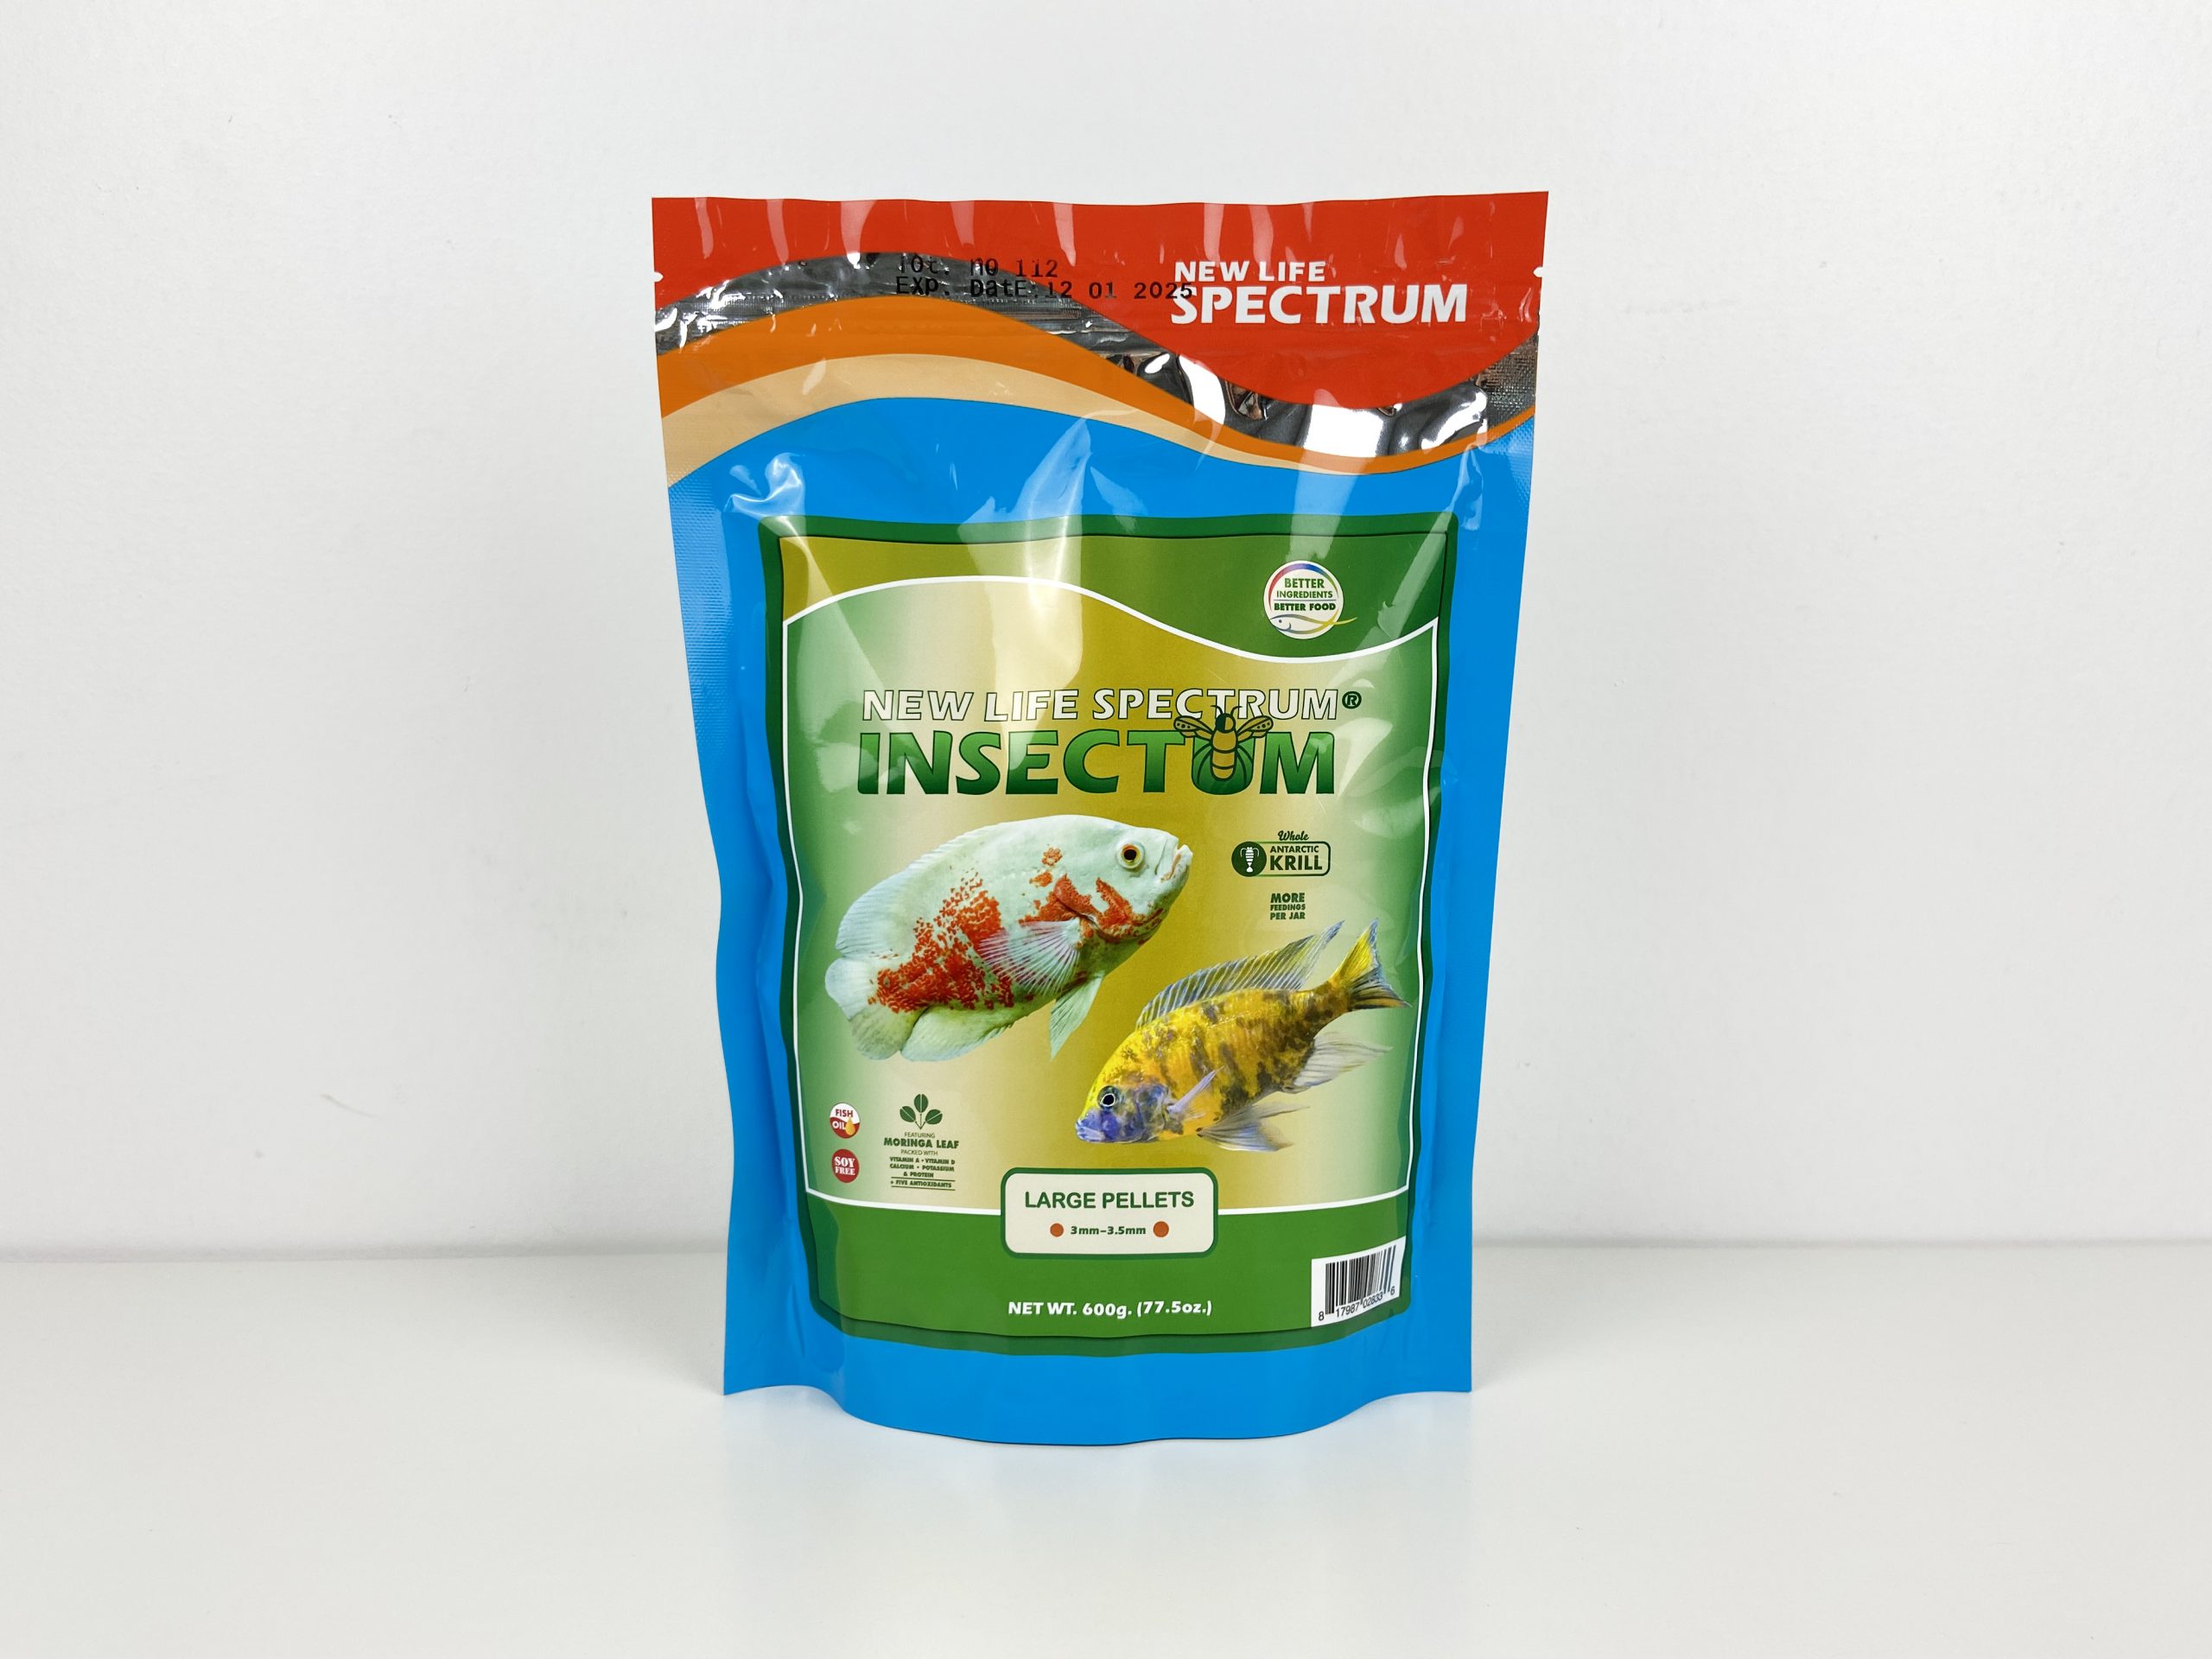 New Life Spectrum Insectum 3mm Large Pellets, 600g ...